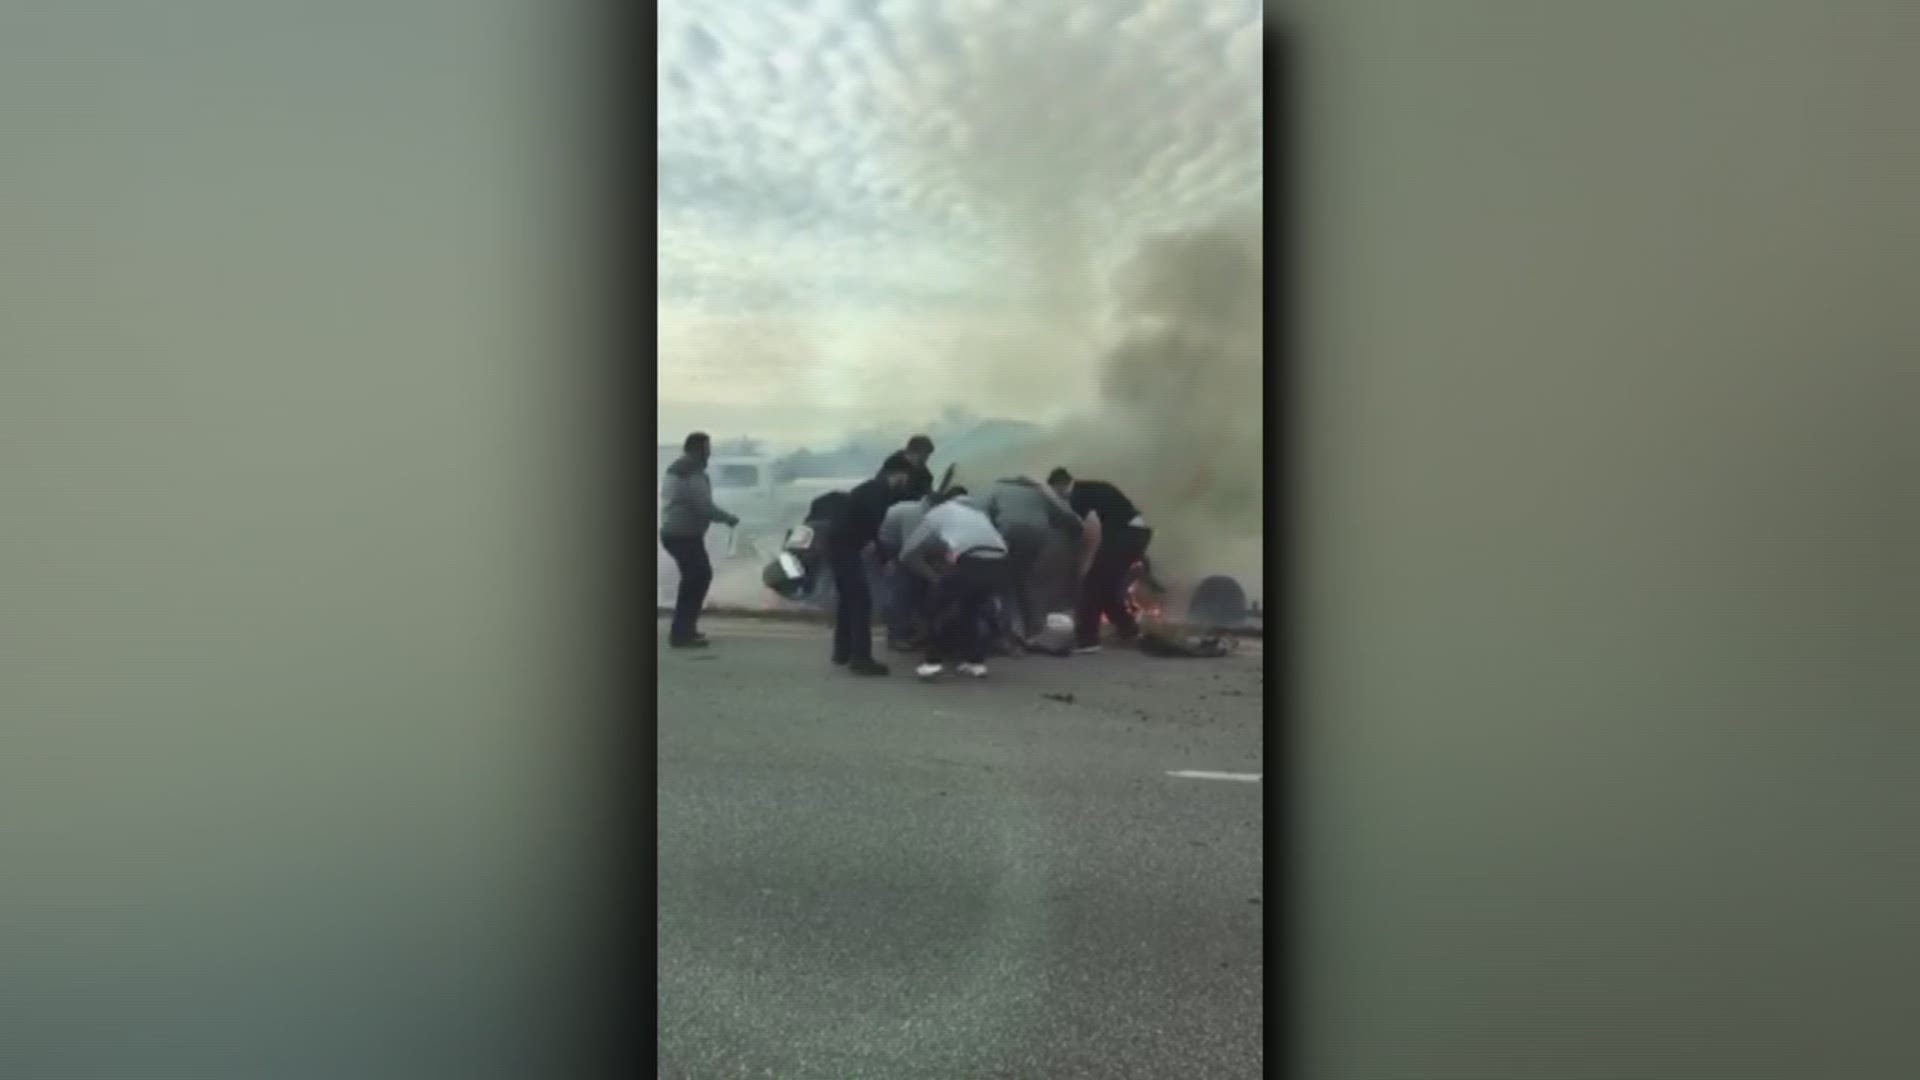 Heroes save man from burning car